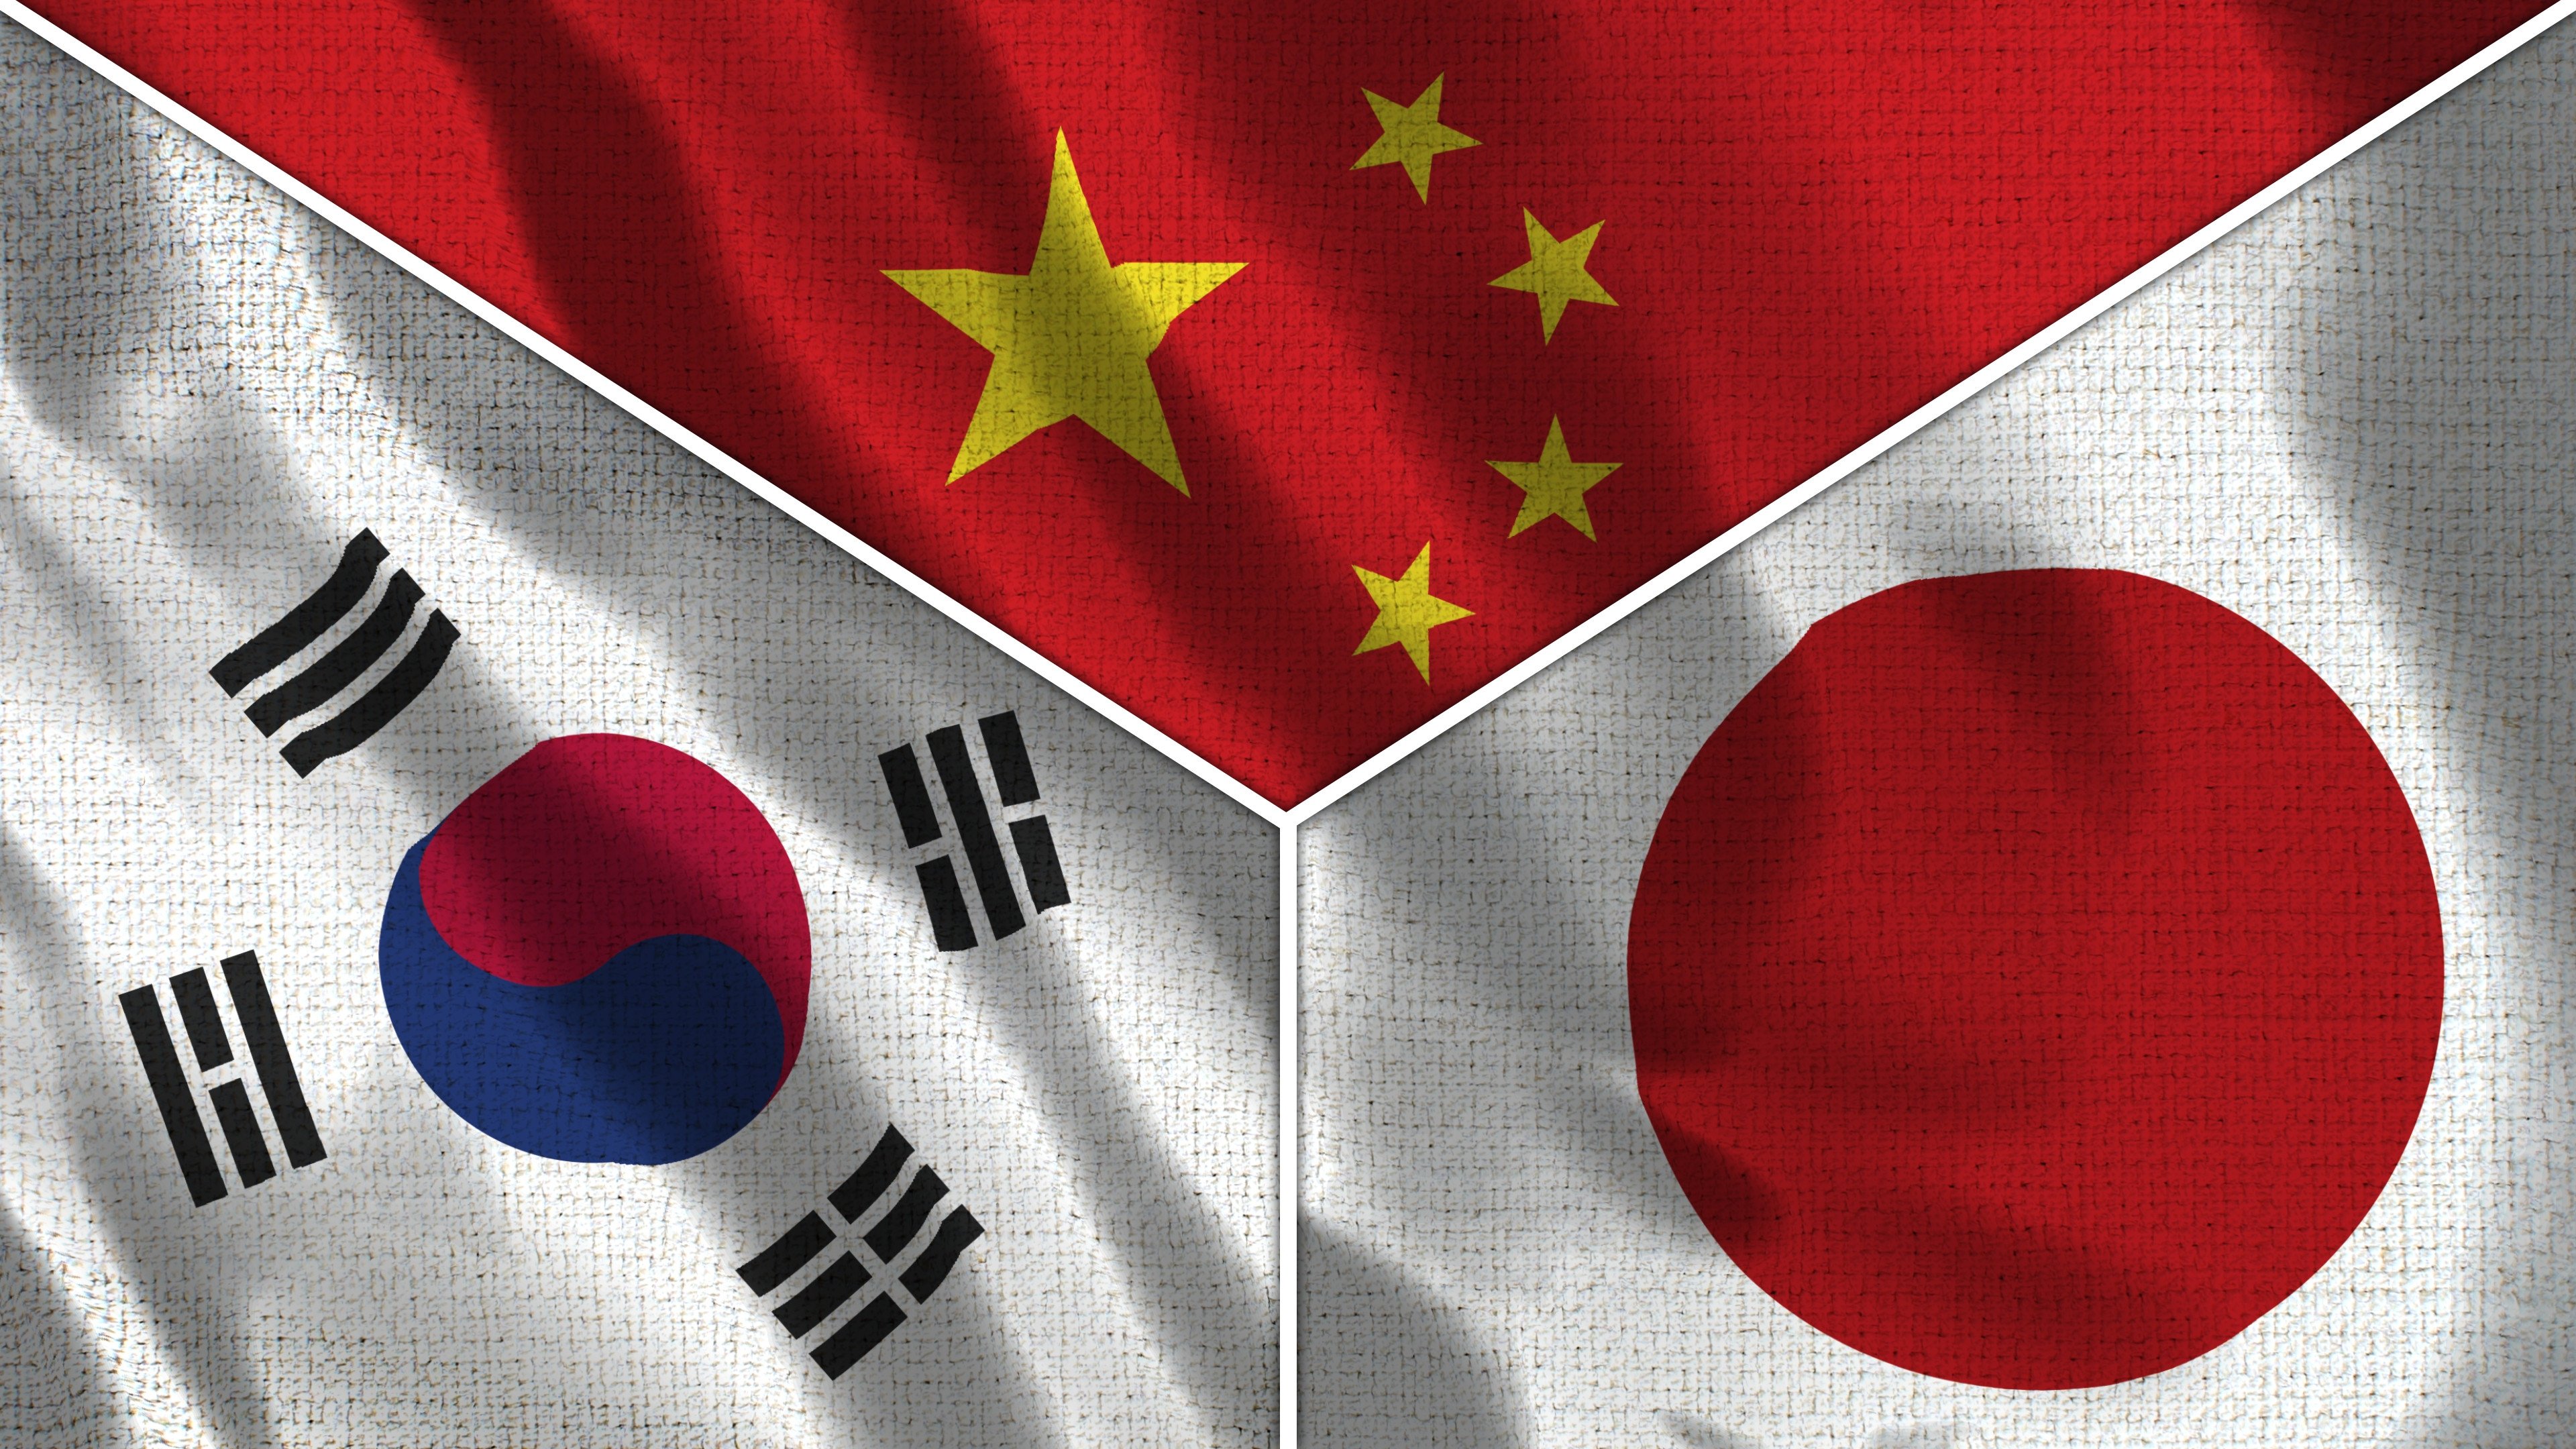 Analysts said the continued delay of a leadership summit between China, Japan and South Korea indicates it is not a priority for the three leaders. Photo: Shutterstock